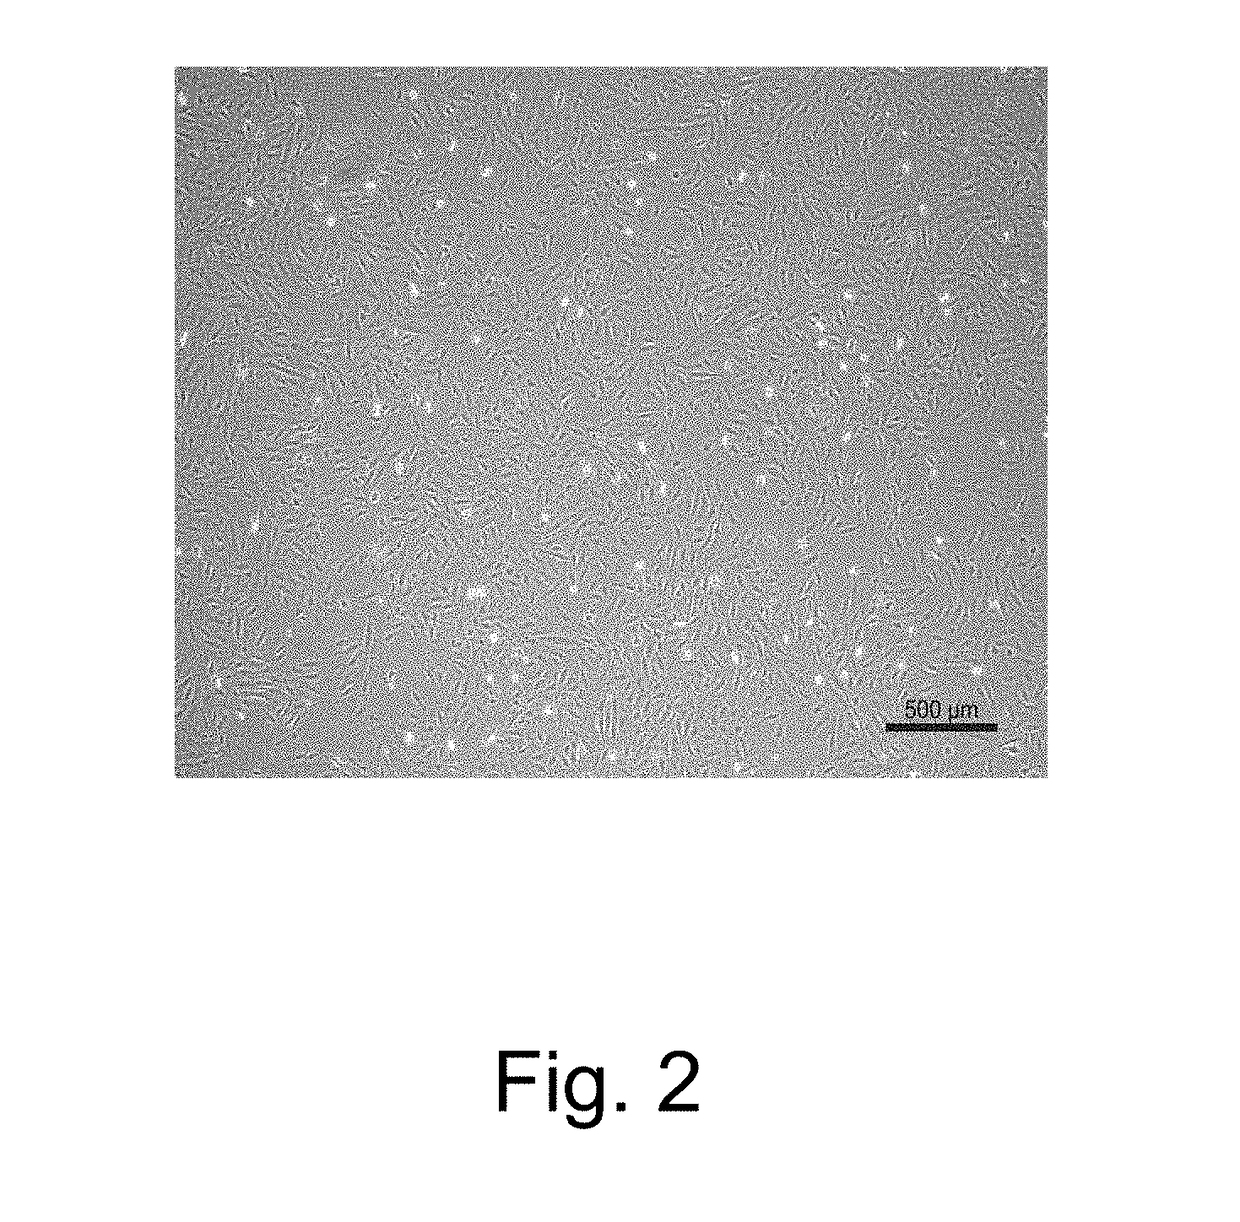 Placenta-derived potential cells and preparing method thereof